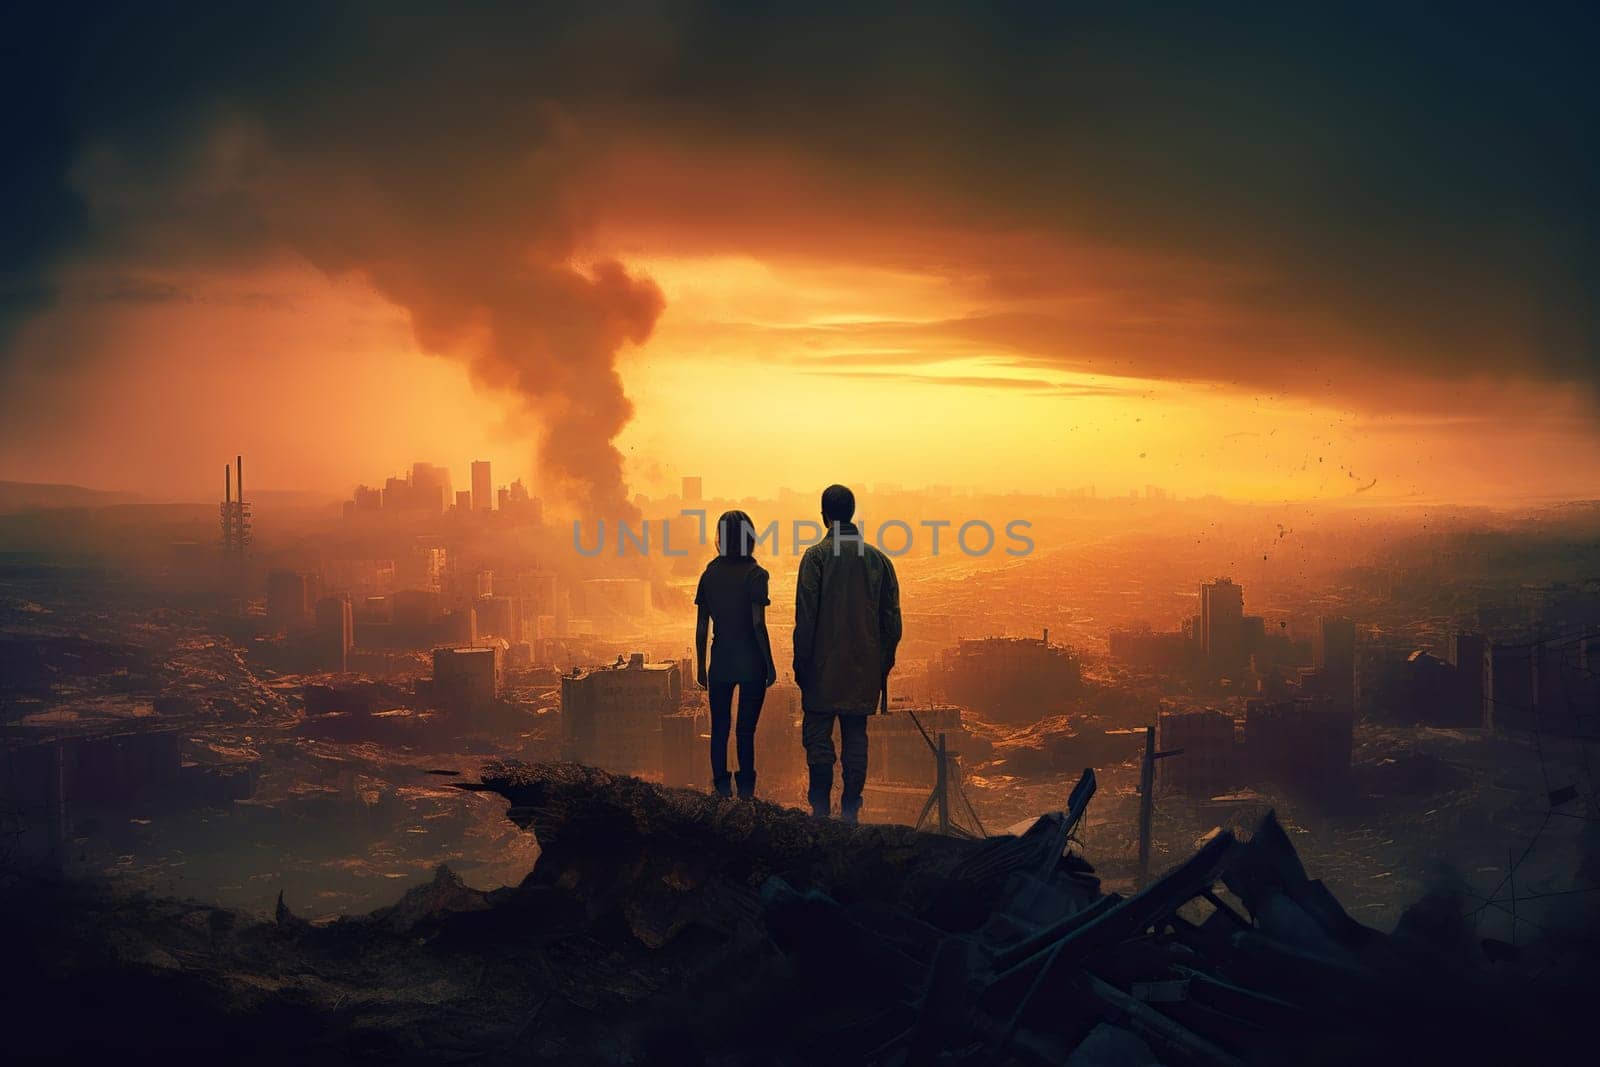 Silhouettes Of An Adult Male And Child Against A Burning City Ruined By An Explosion